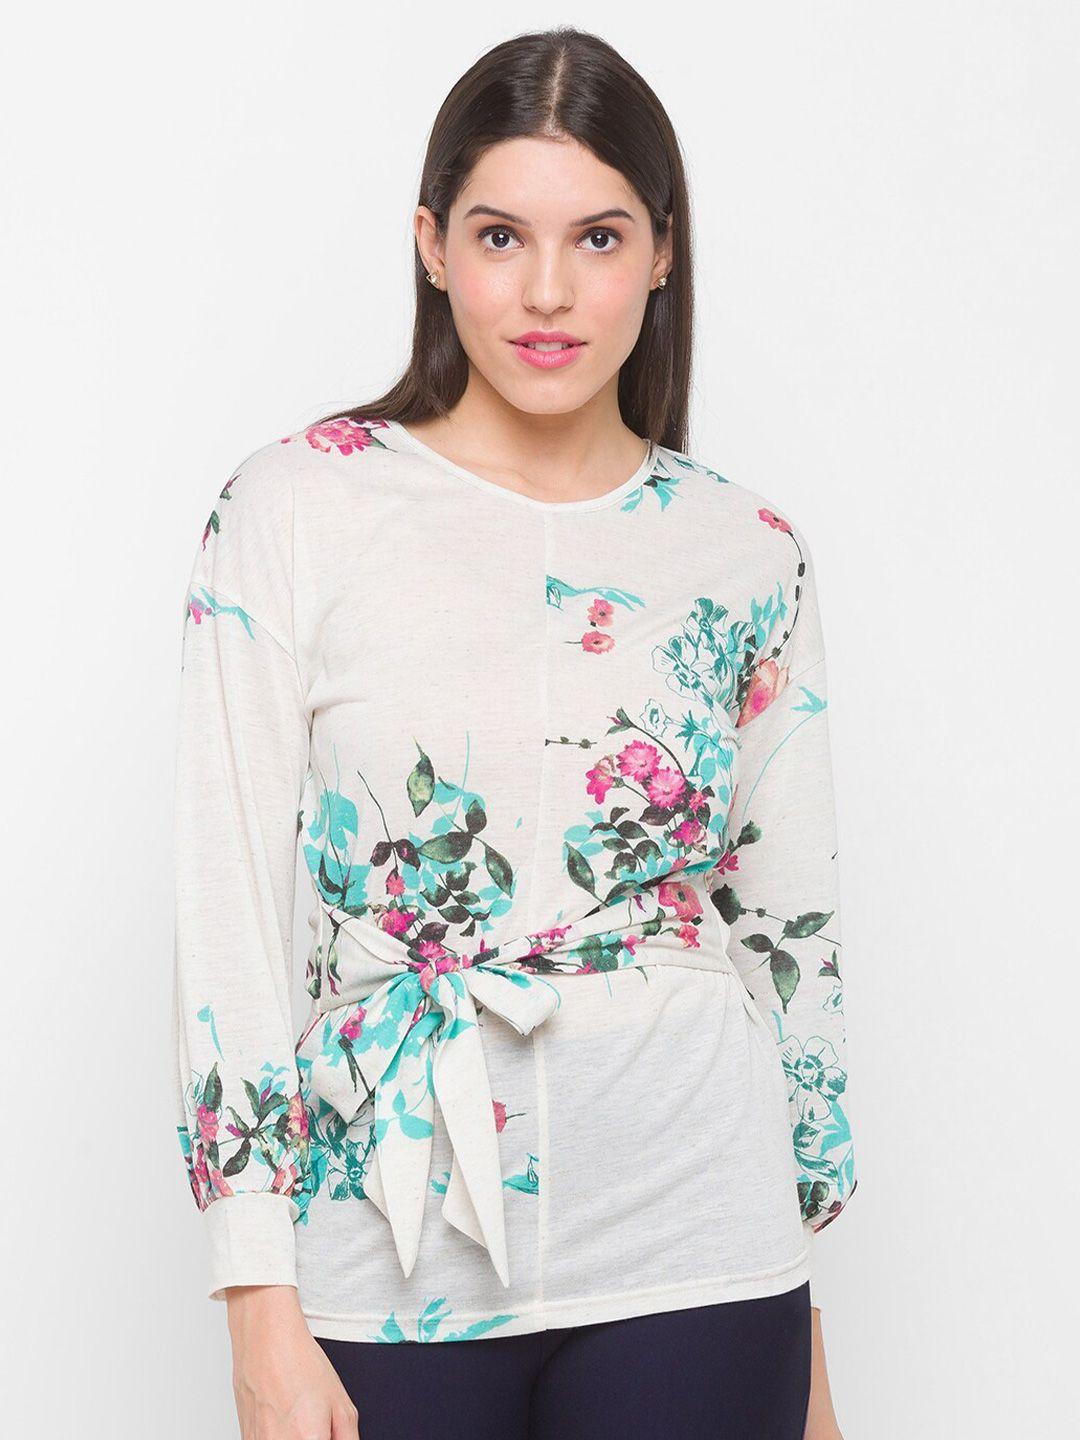 globus-off-white-&-green-floral-print-top